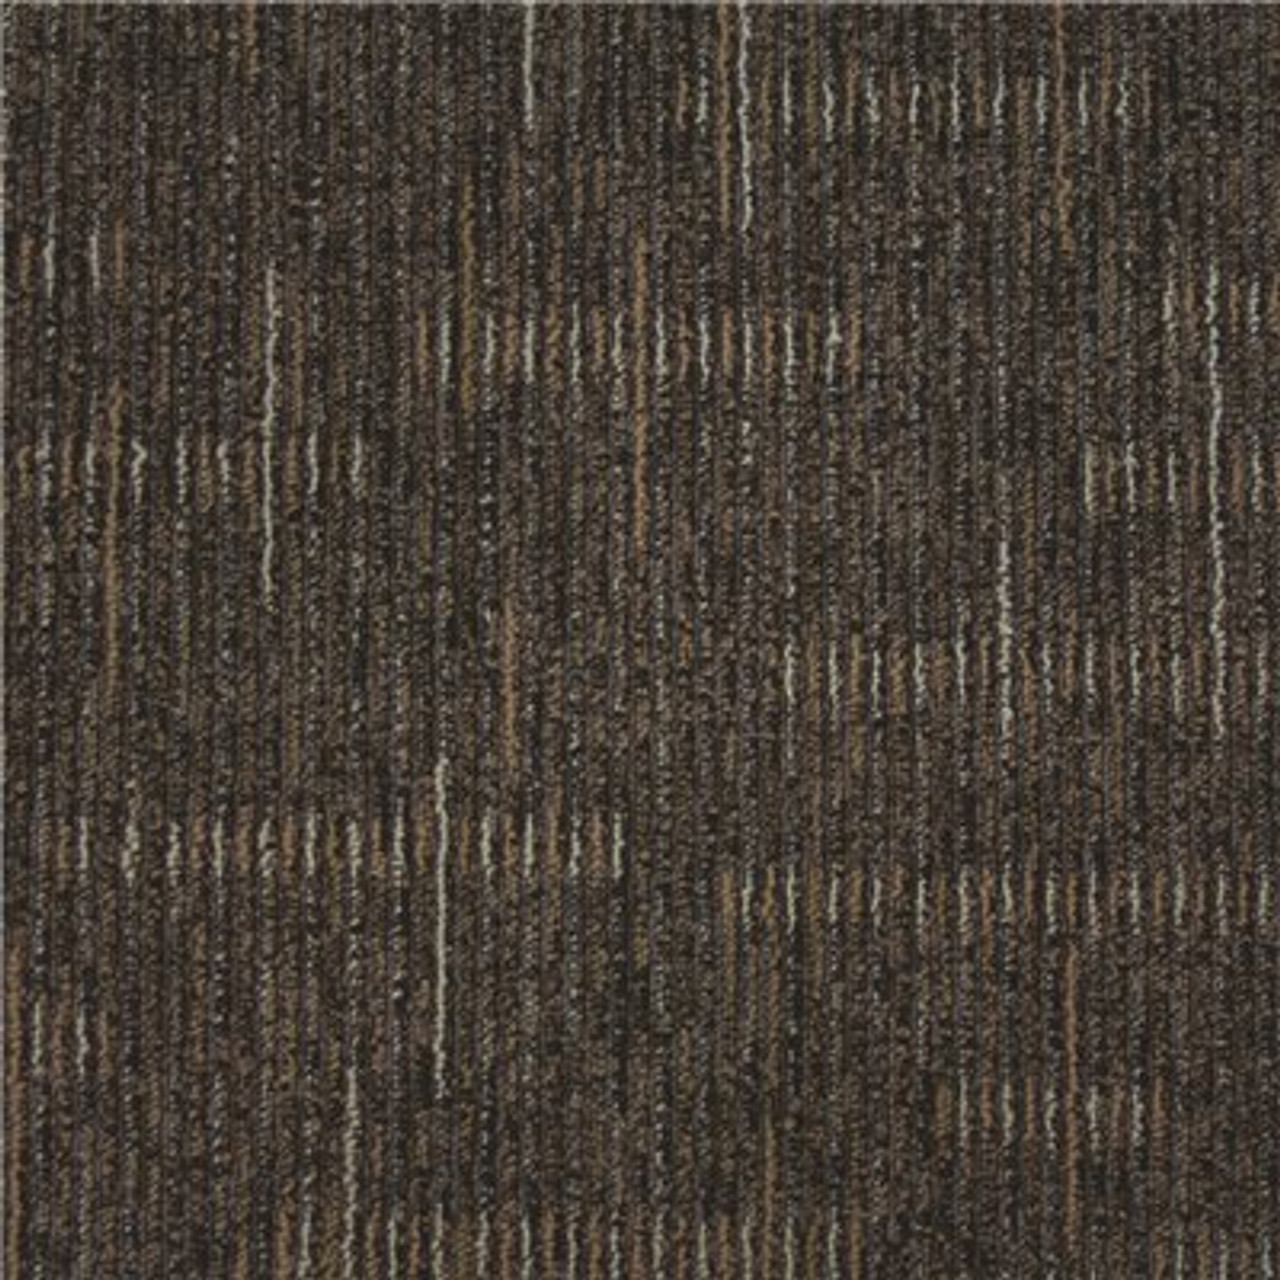 TrafficMaster Simply Comfort Silver Taupe Loop 19.7 in. x 19.7 in. Carpet Tile (20 Tiles/Case)